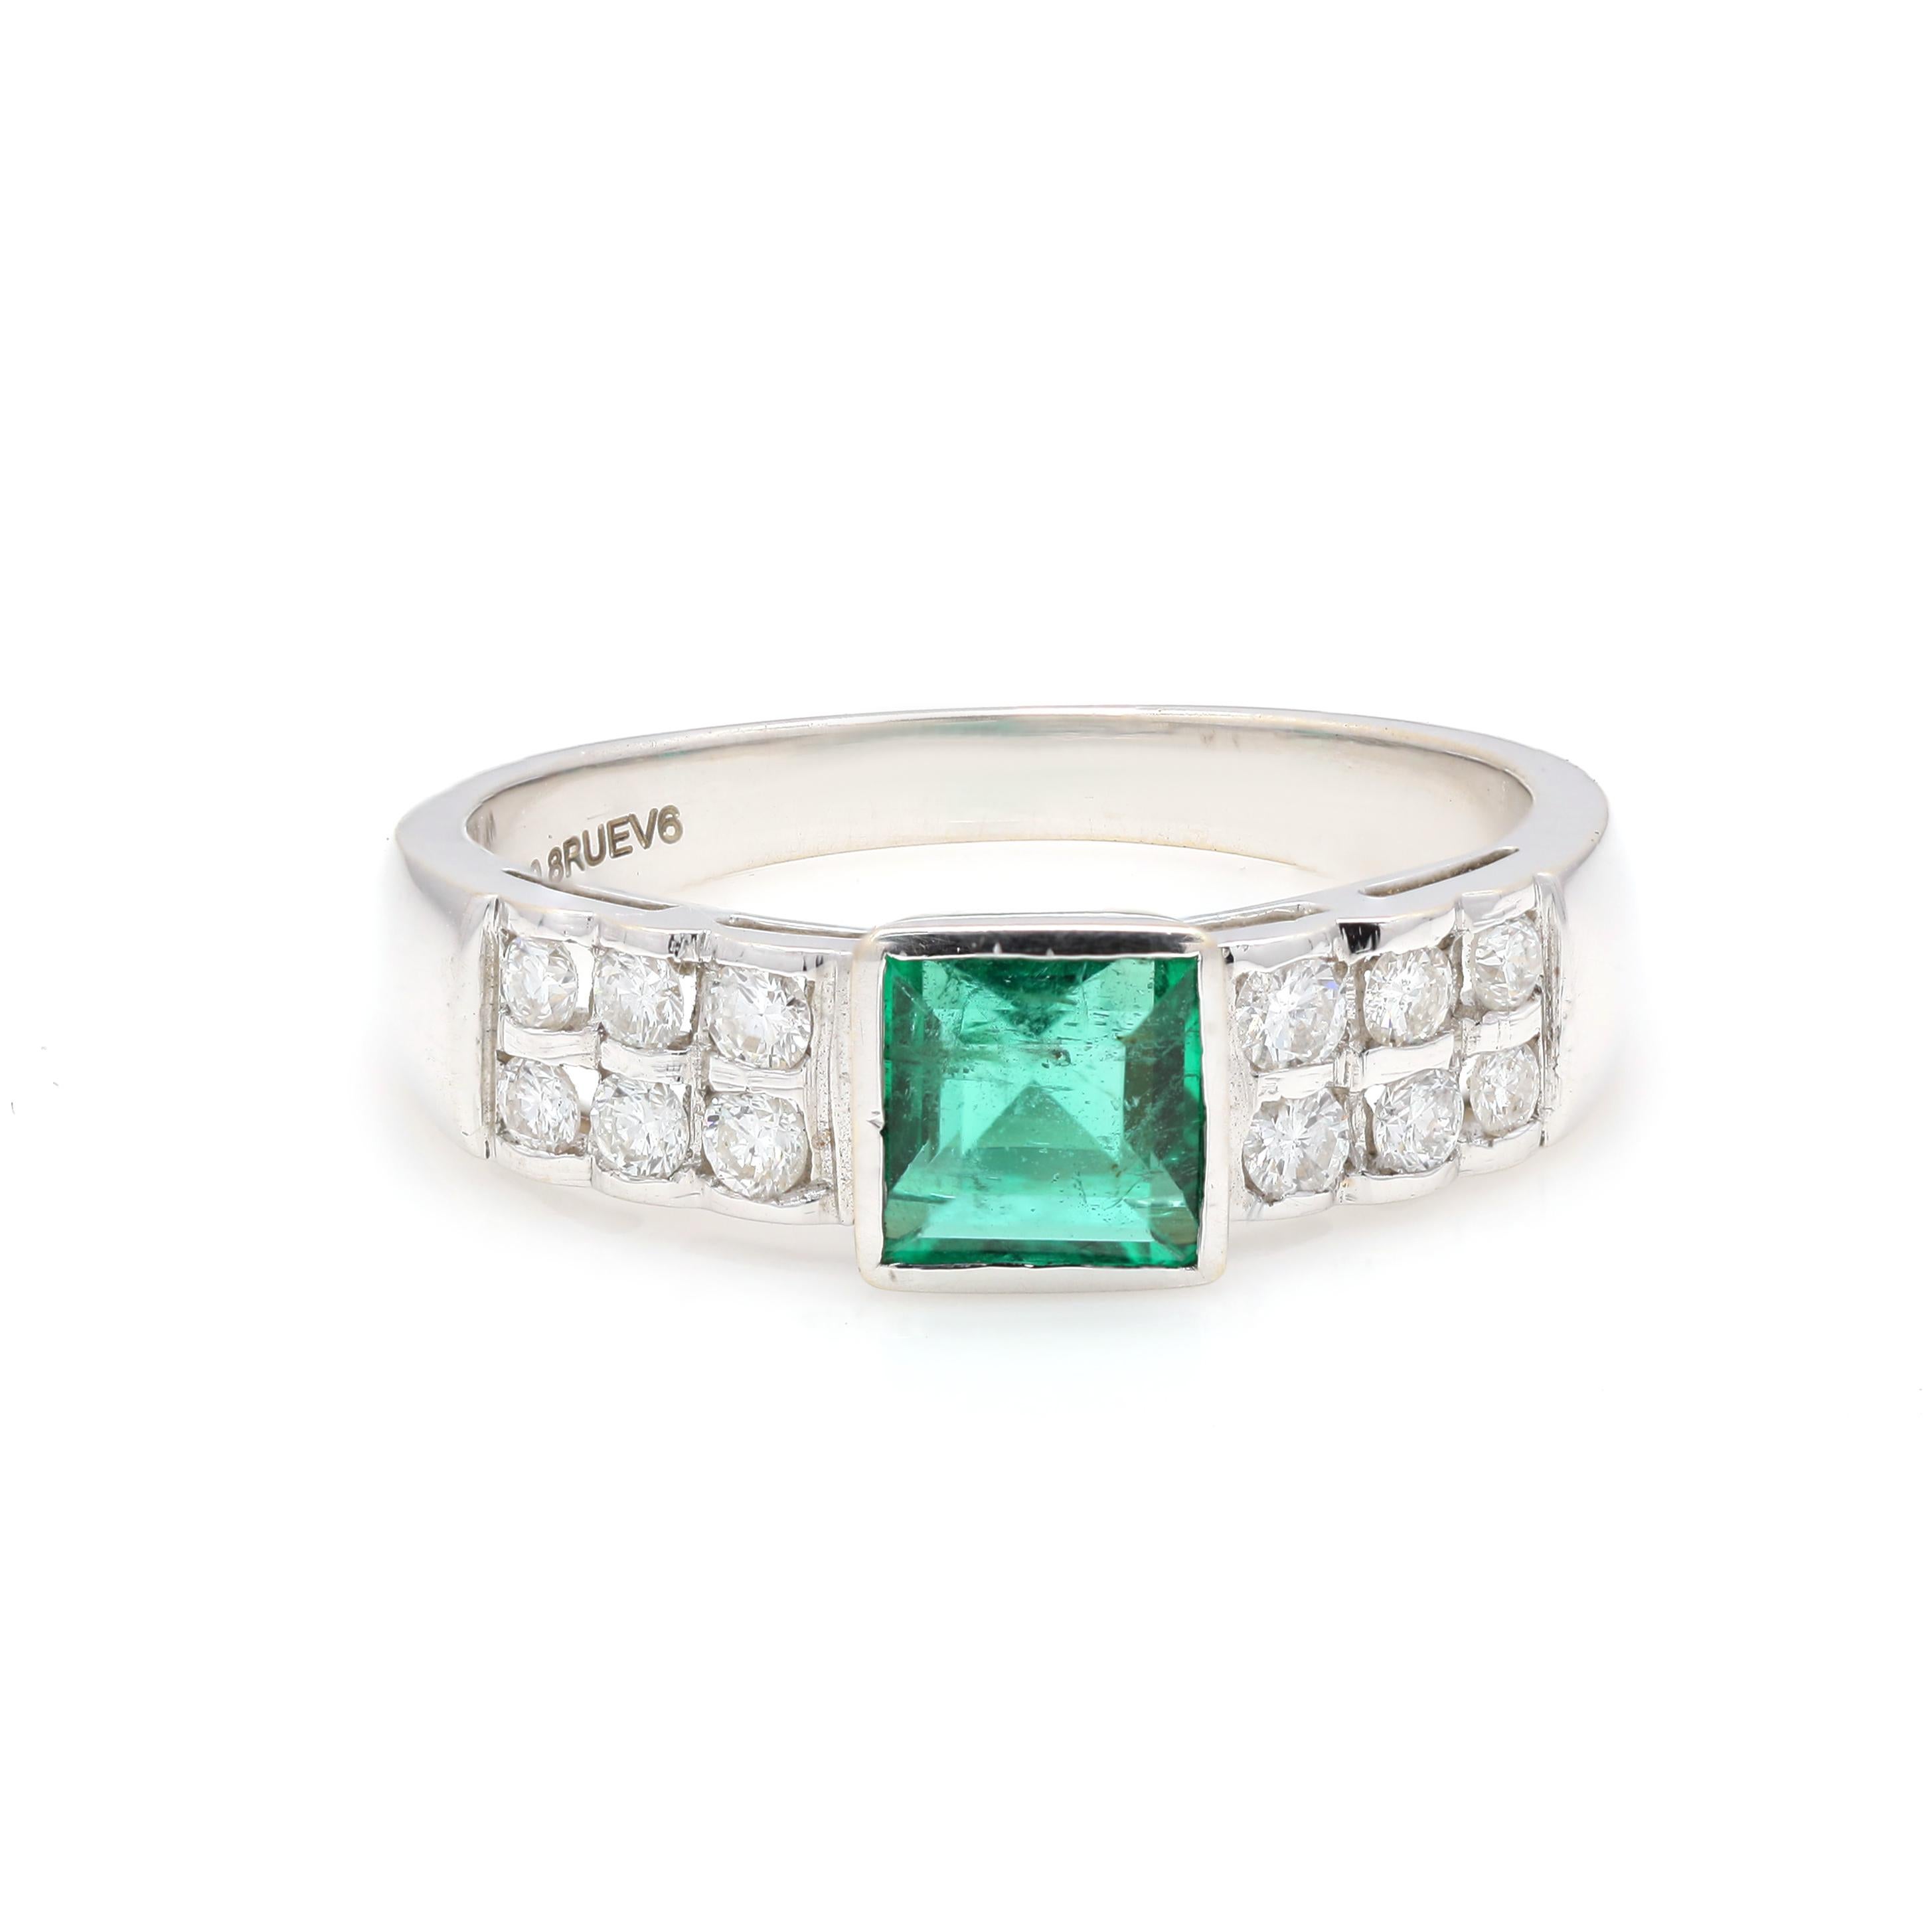 For Sale:  Unisex Diamond and Natural Emerald Engagement Band Ring in 18k White Gold 3